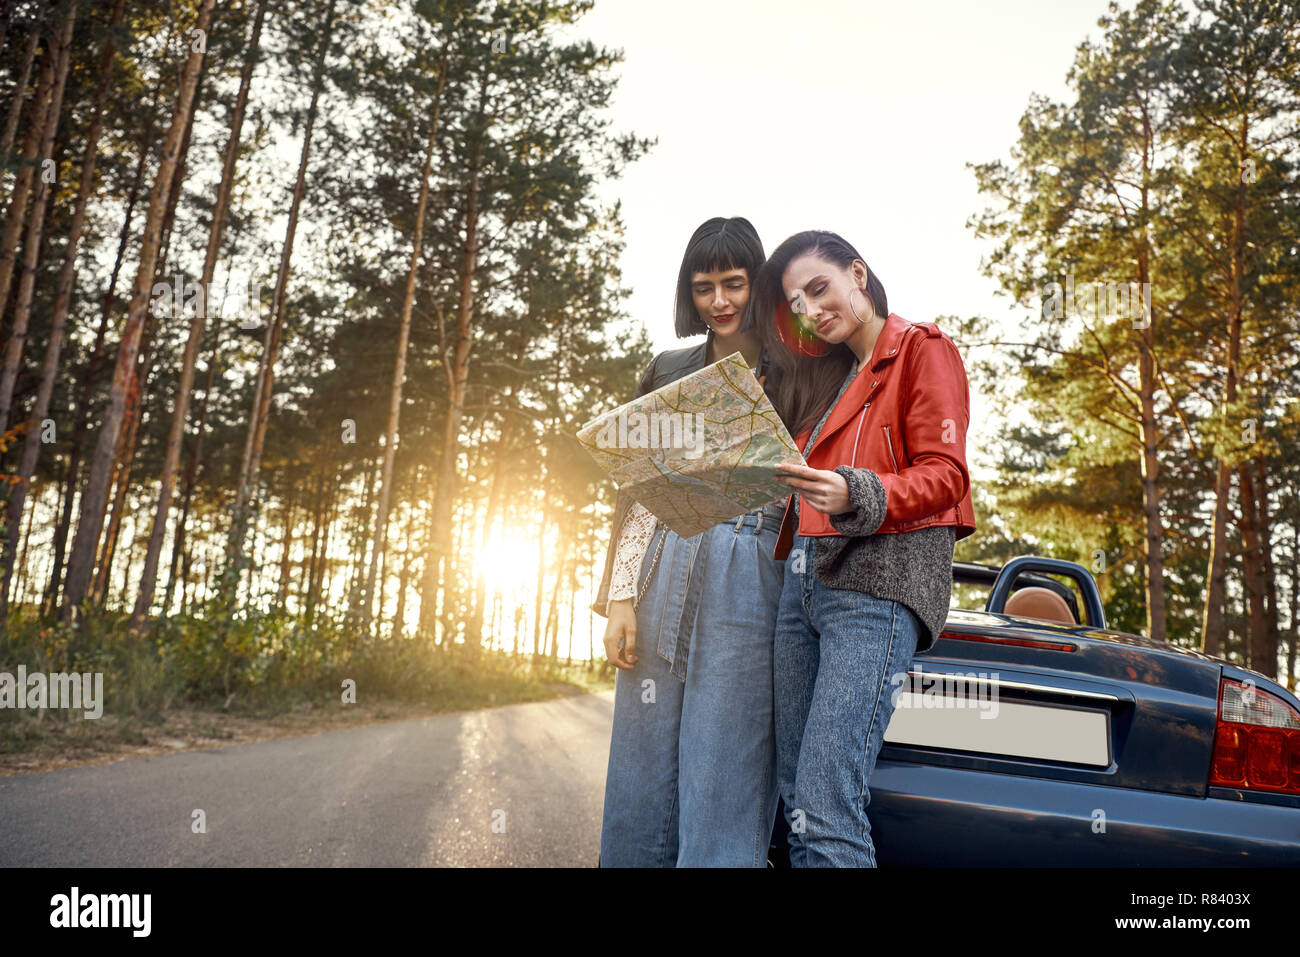 Two women trying to find the way on map near cabriolet Stock Photo